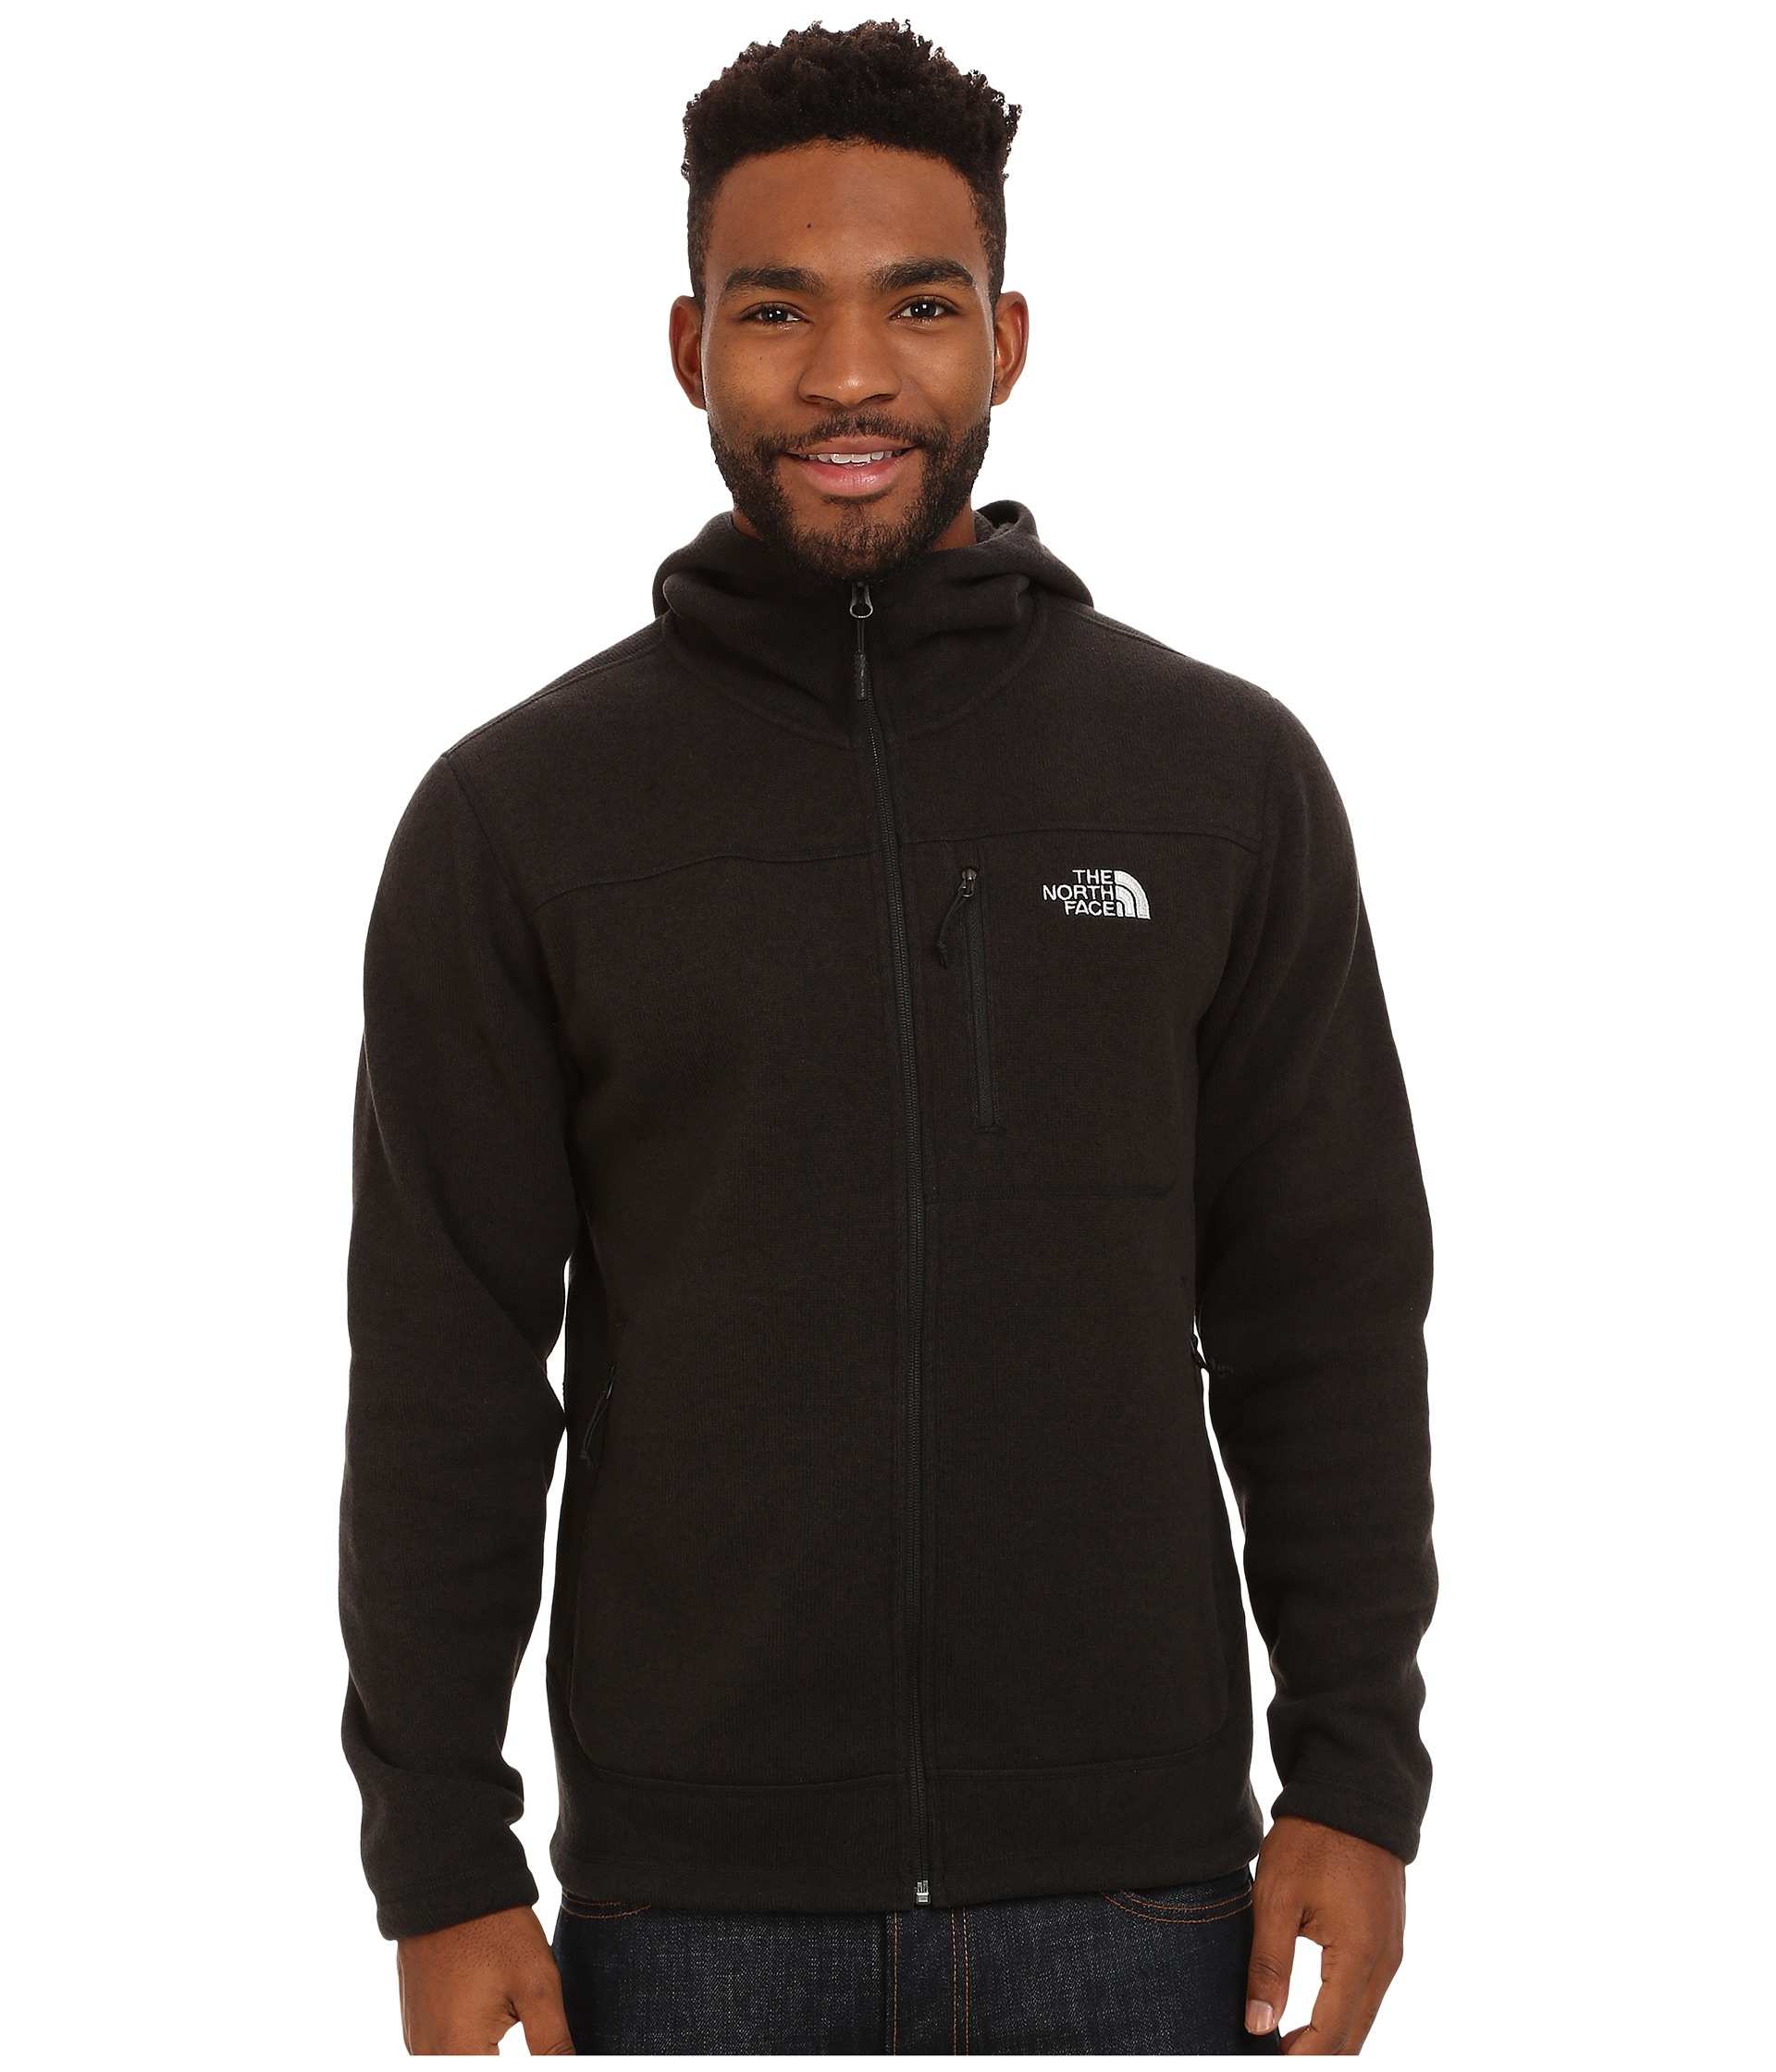 Lyst - The North Face Gordon Lyons Hoodie in Black for Men